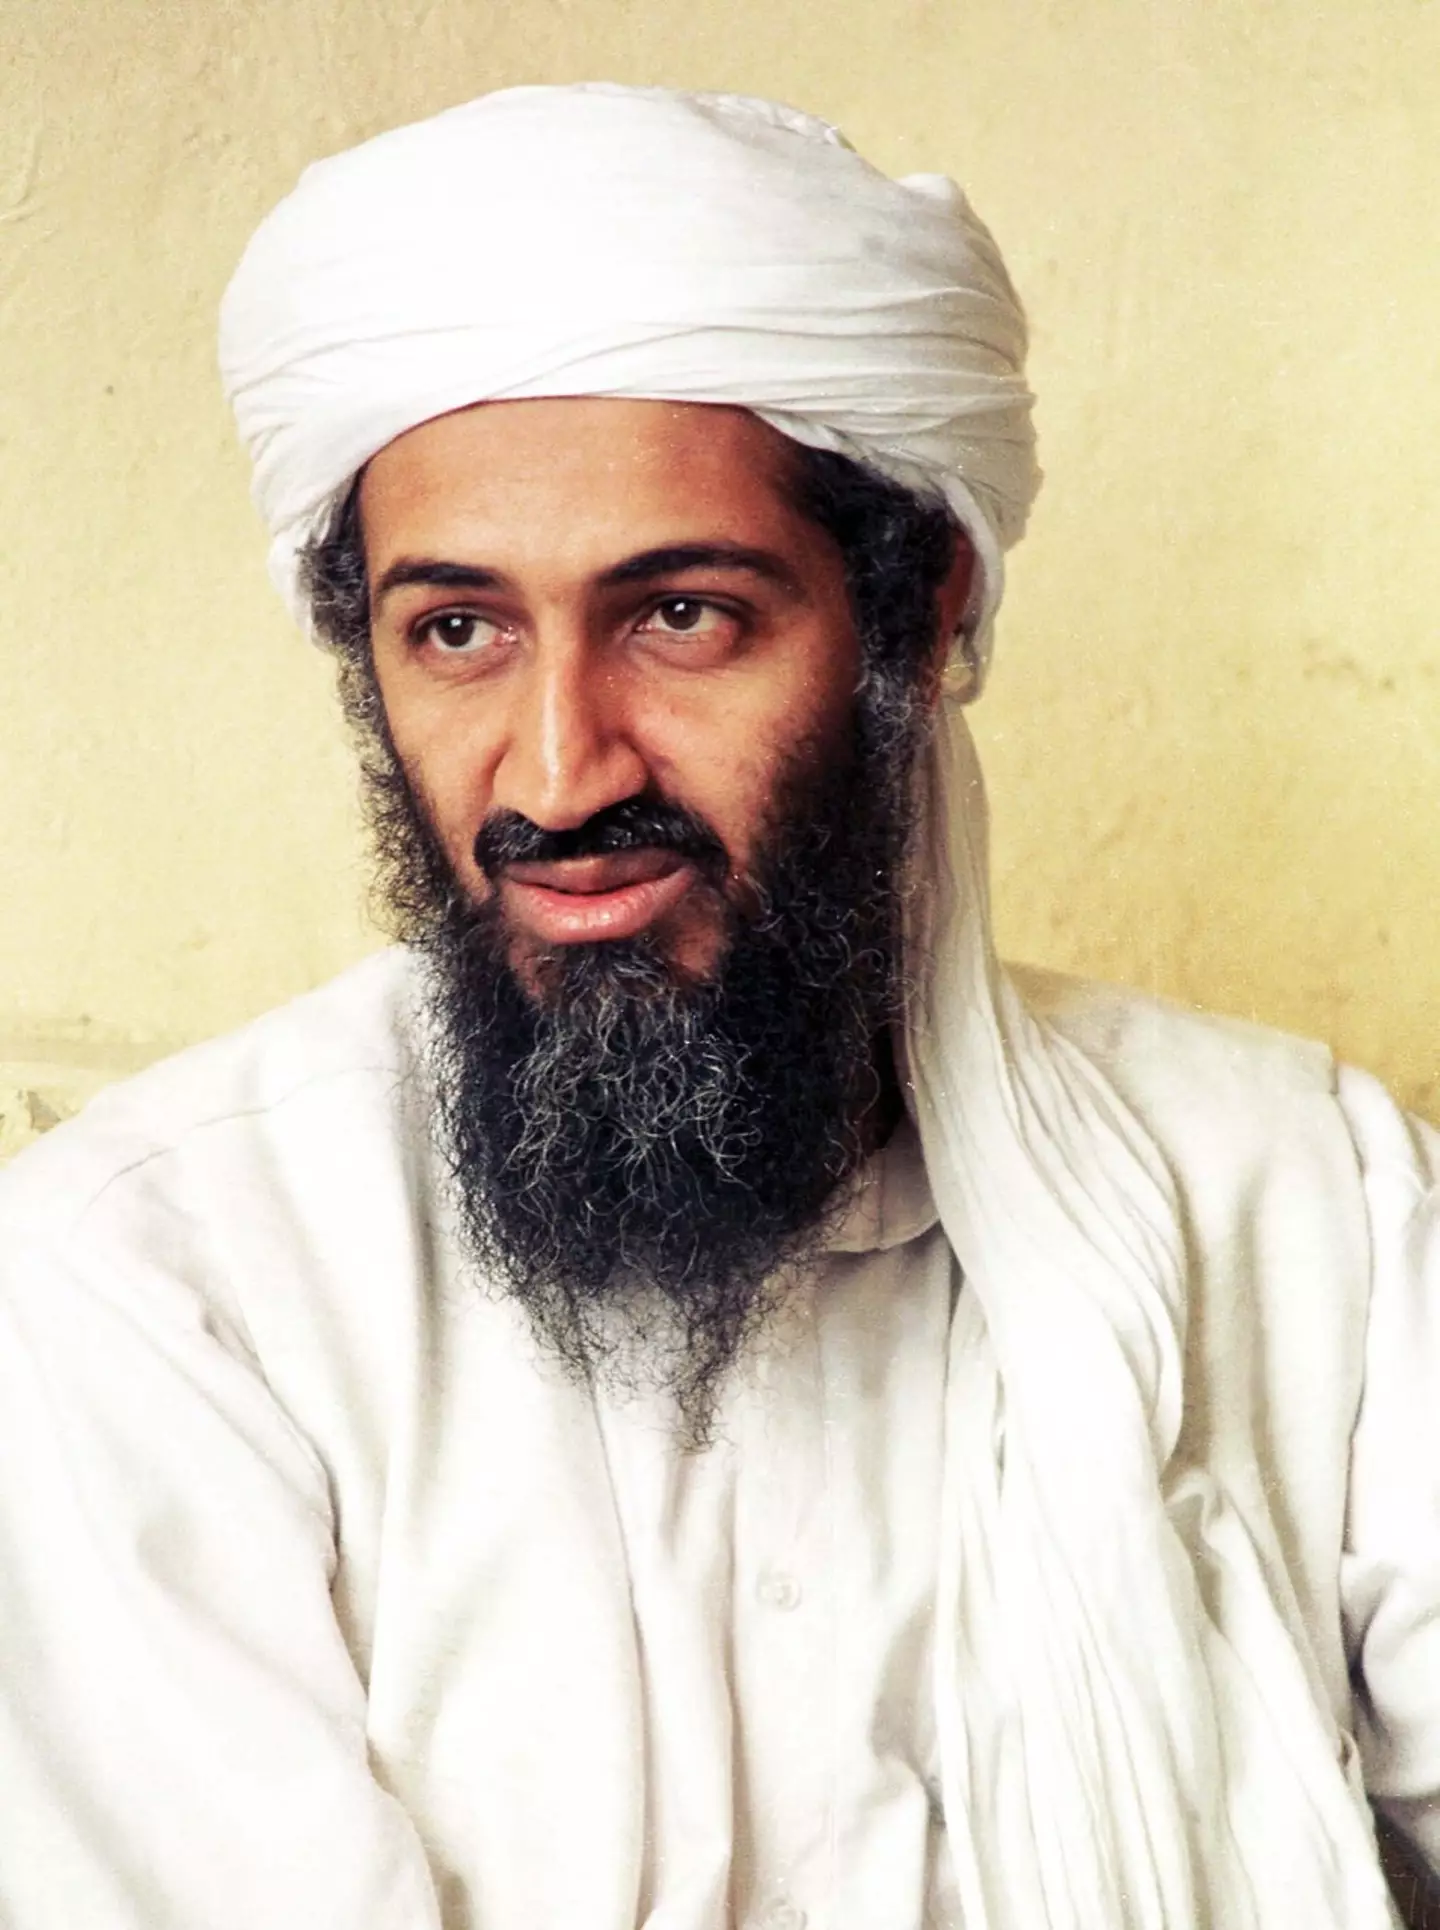 In 2011, the former leader of al-Qaeda was killed in his compound in Abbottabad, Pakistan, by United States Navy SEALs.